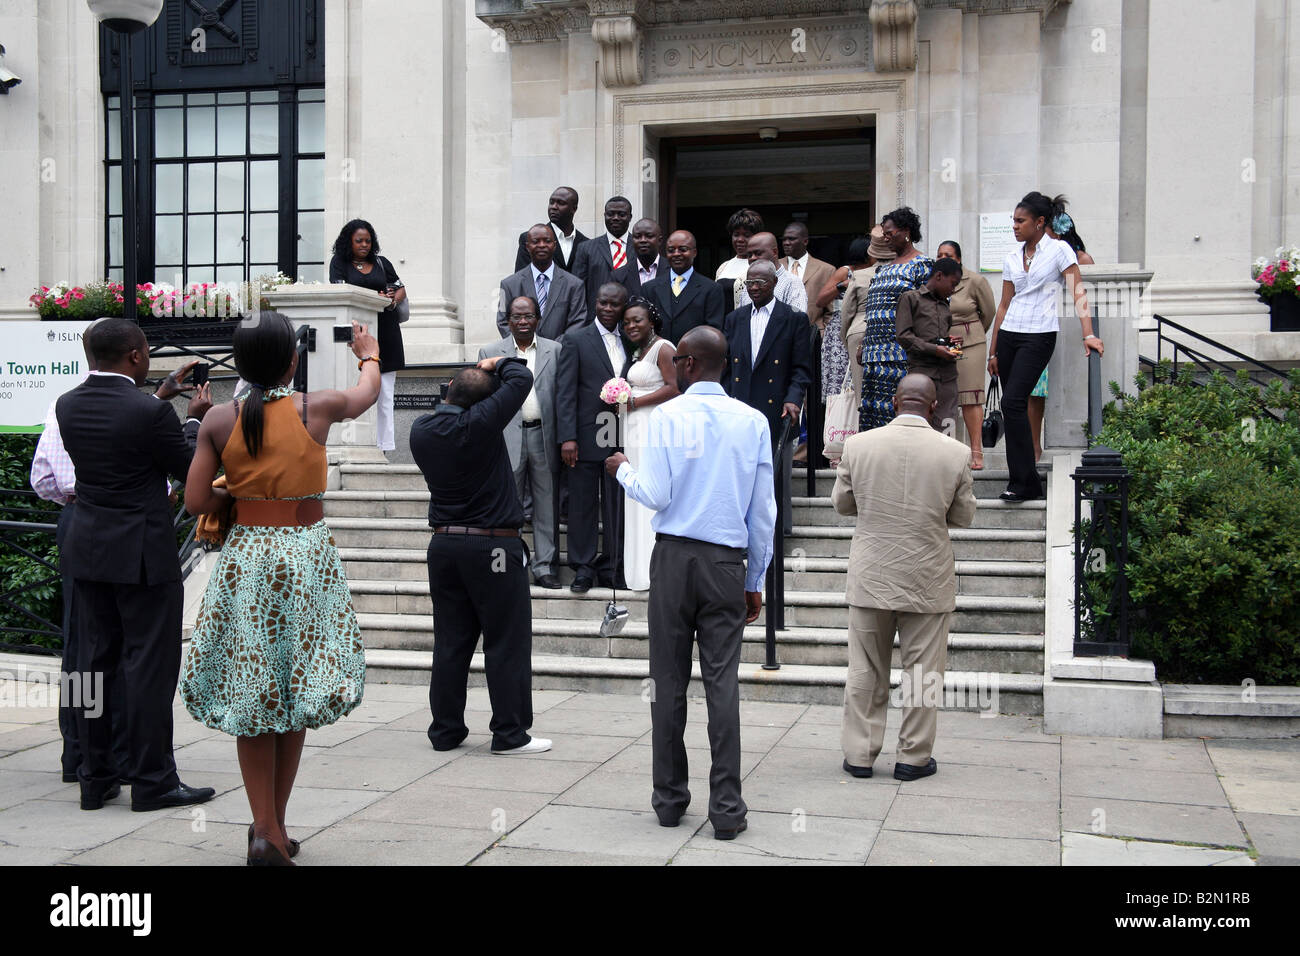 Members of Black British community pose for wedding pictures outside a town hall in London Stock Photo